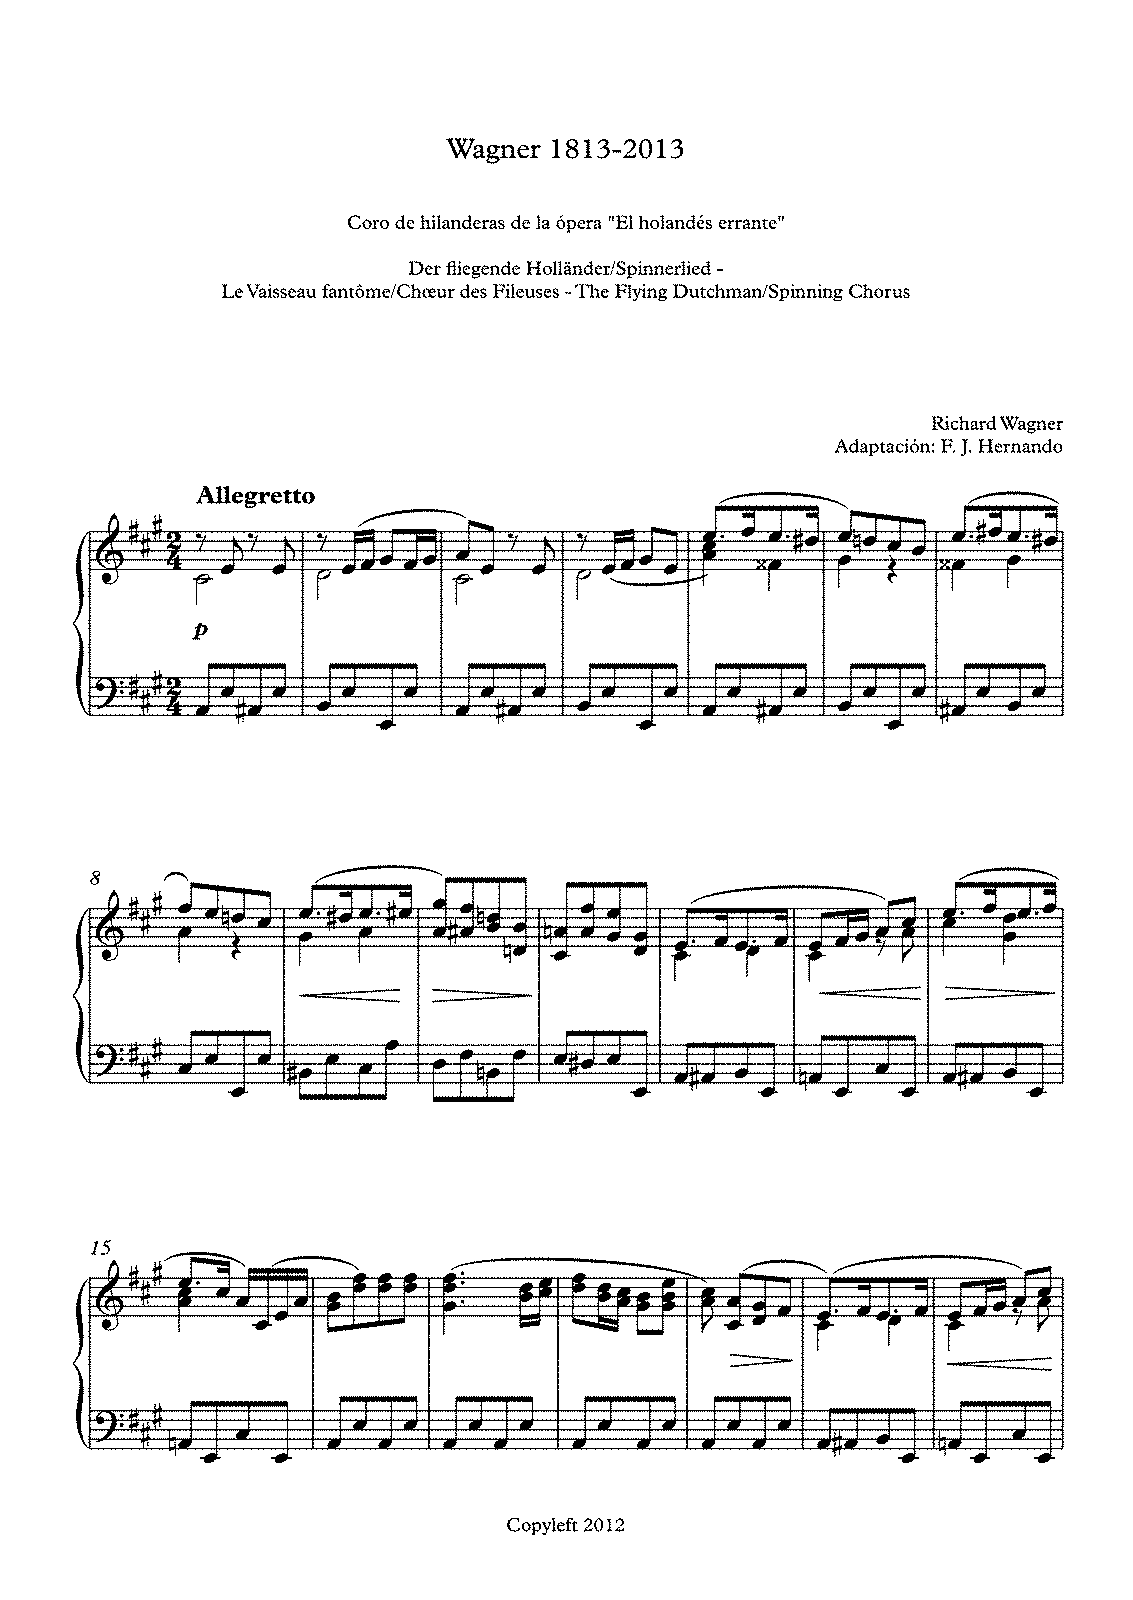 Wagner for Young Pianists (Wagner, Richard) - IMSLP: Free Sheet Music